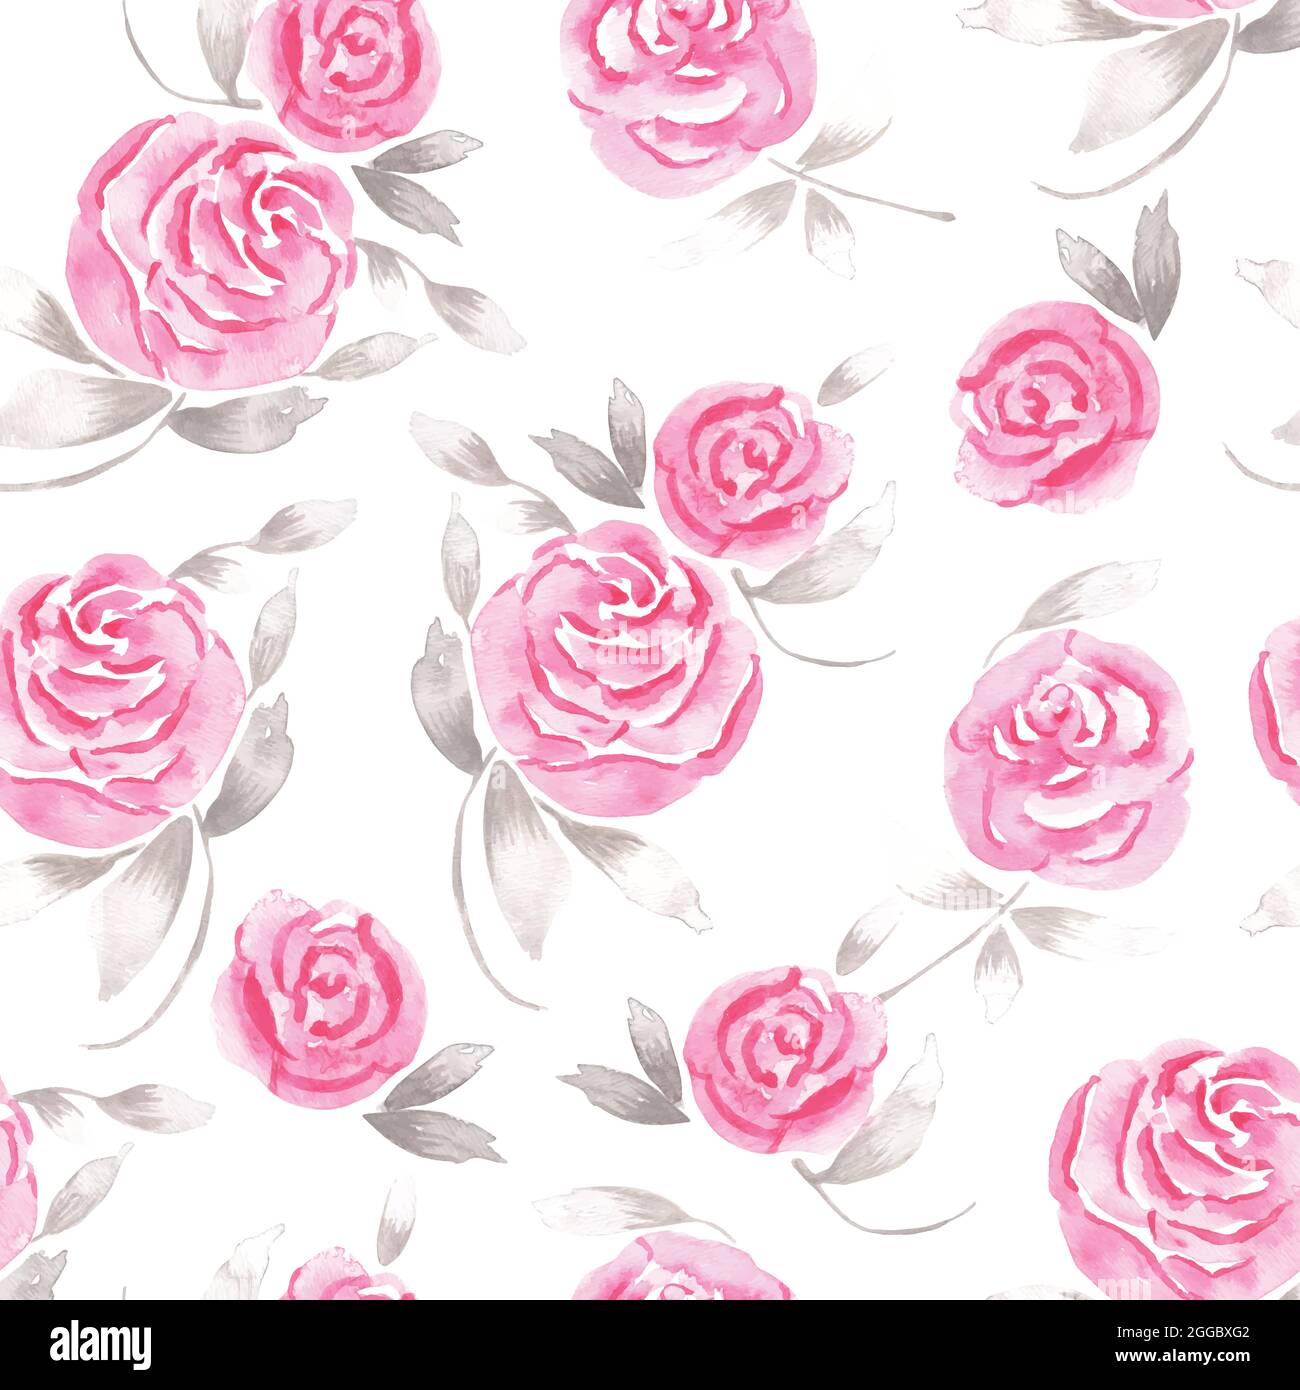 Romantic pattern with pink rose flowers and abstract gray leaves drawn in watercolor Stock Vector